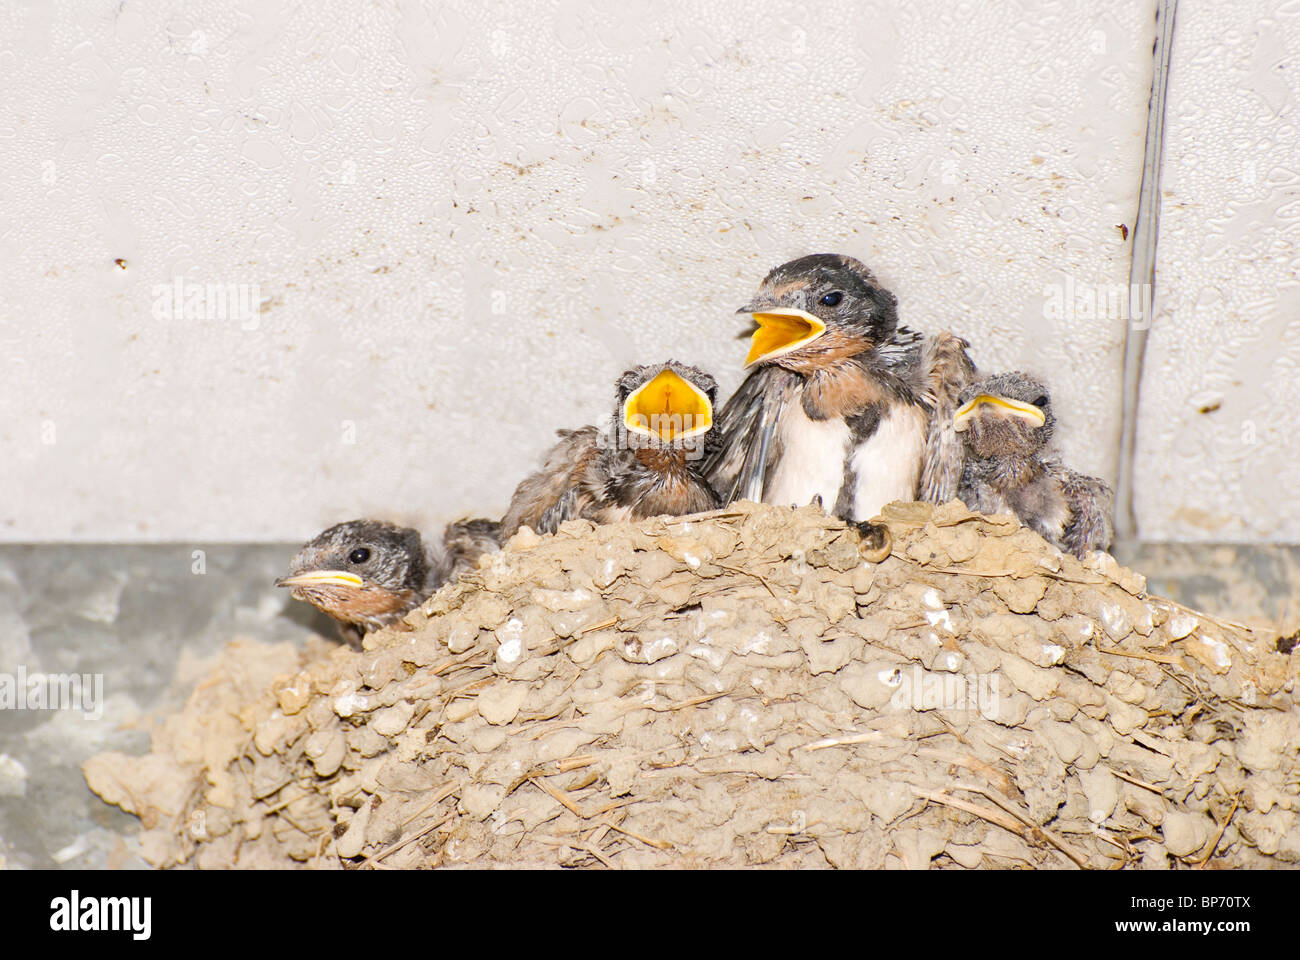 Babies waiting for mother, Pacific Swallow (Hirundo tahitica) construct nest under eave. Taiwan, Asia. Stock Photo